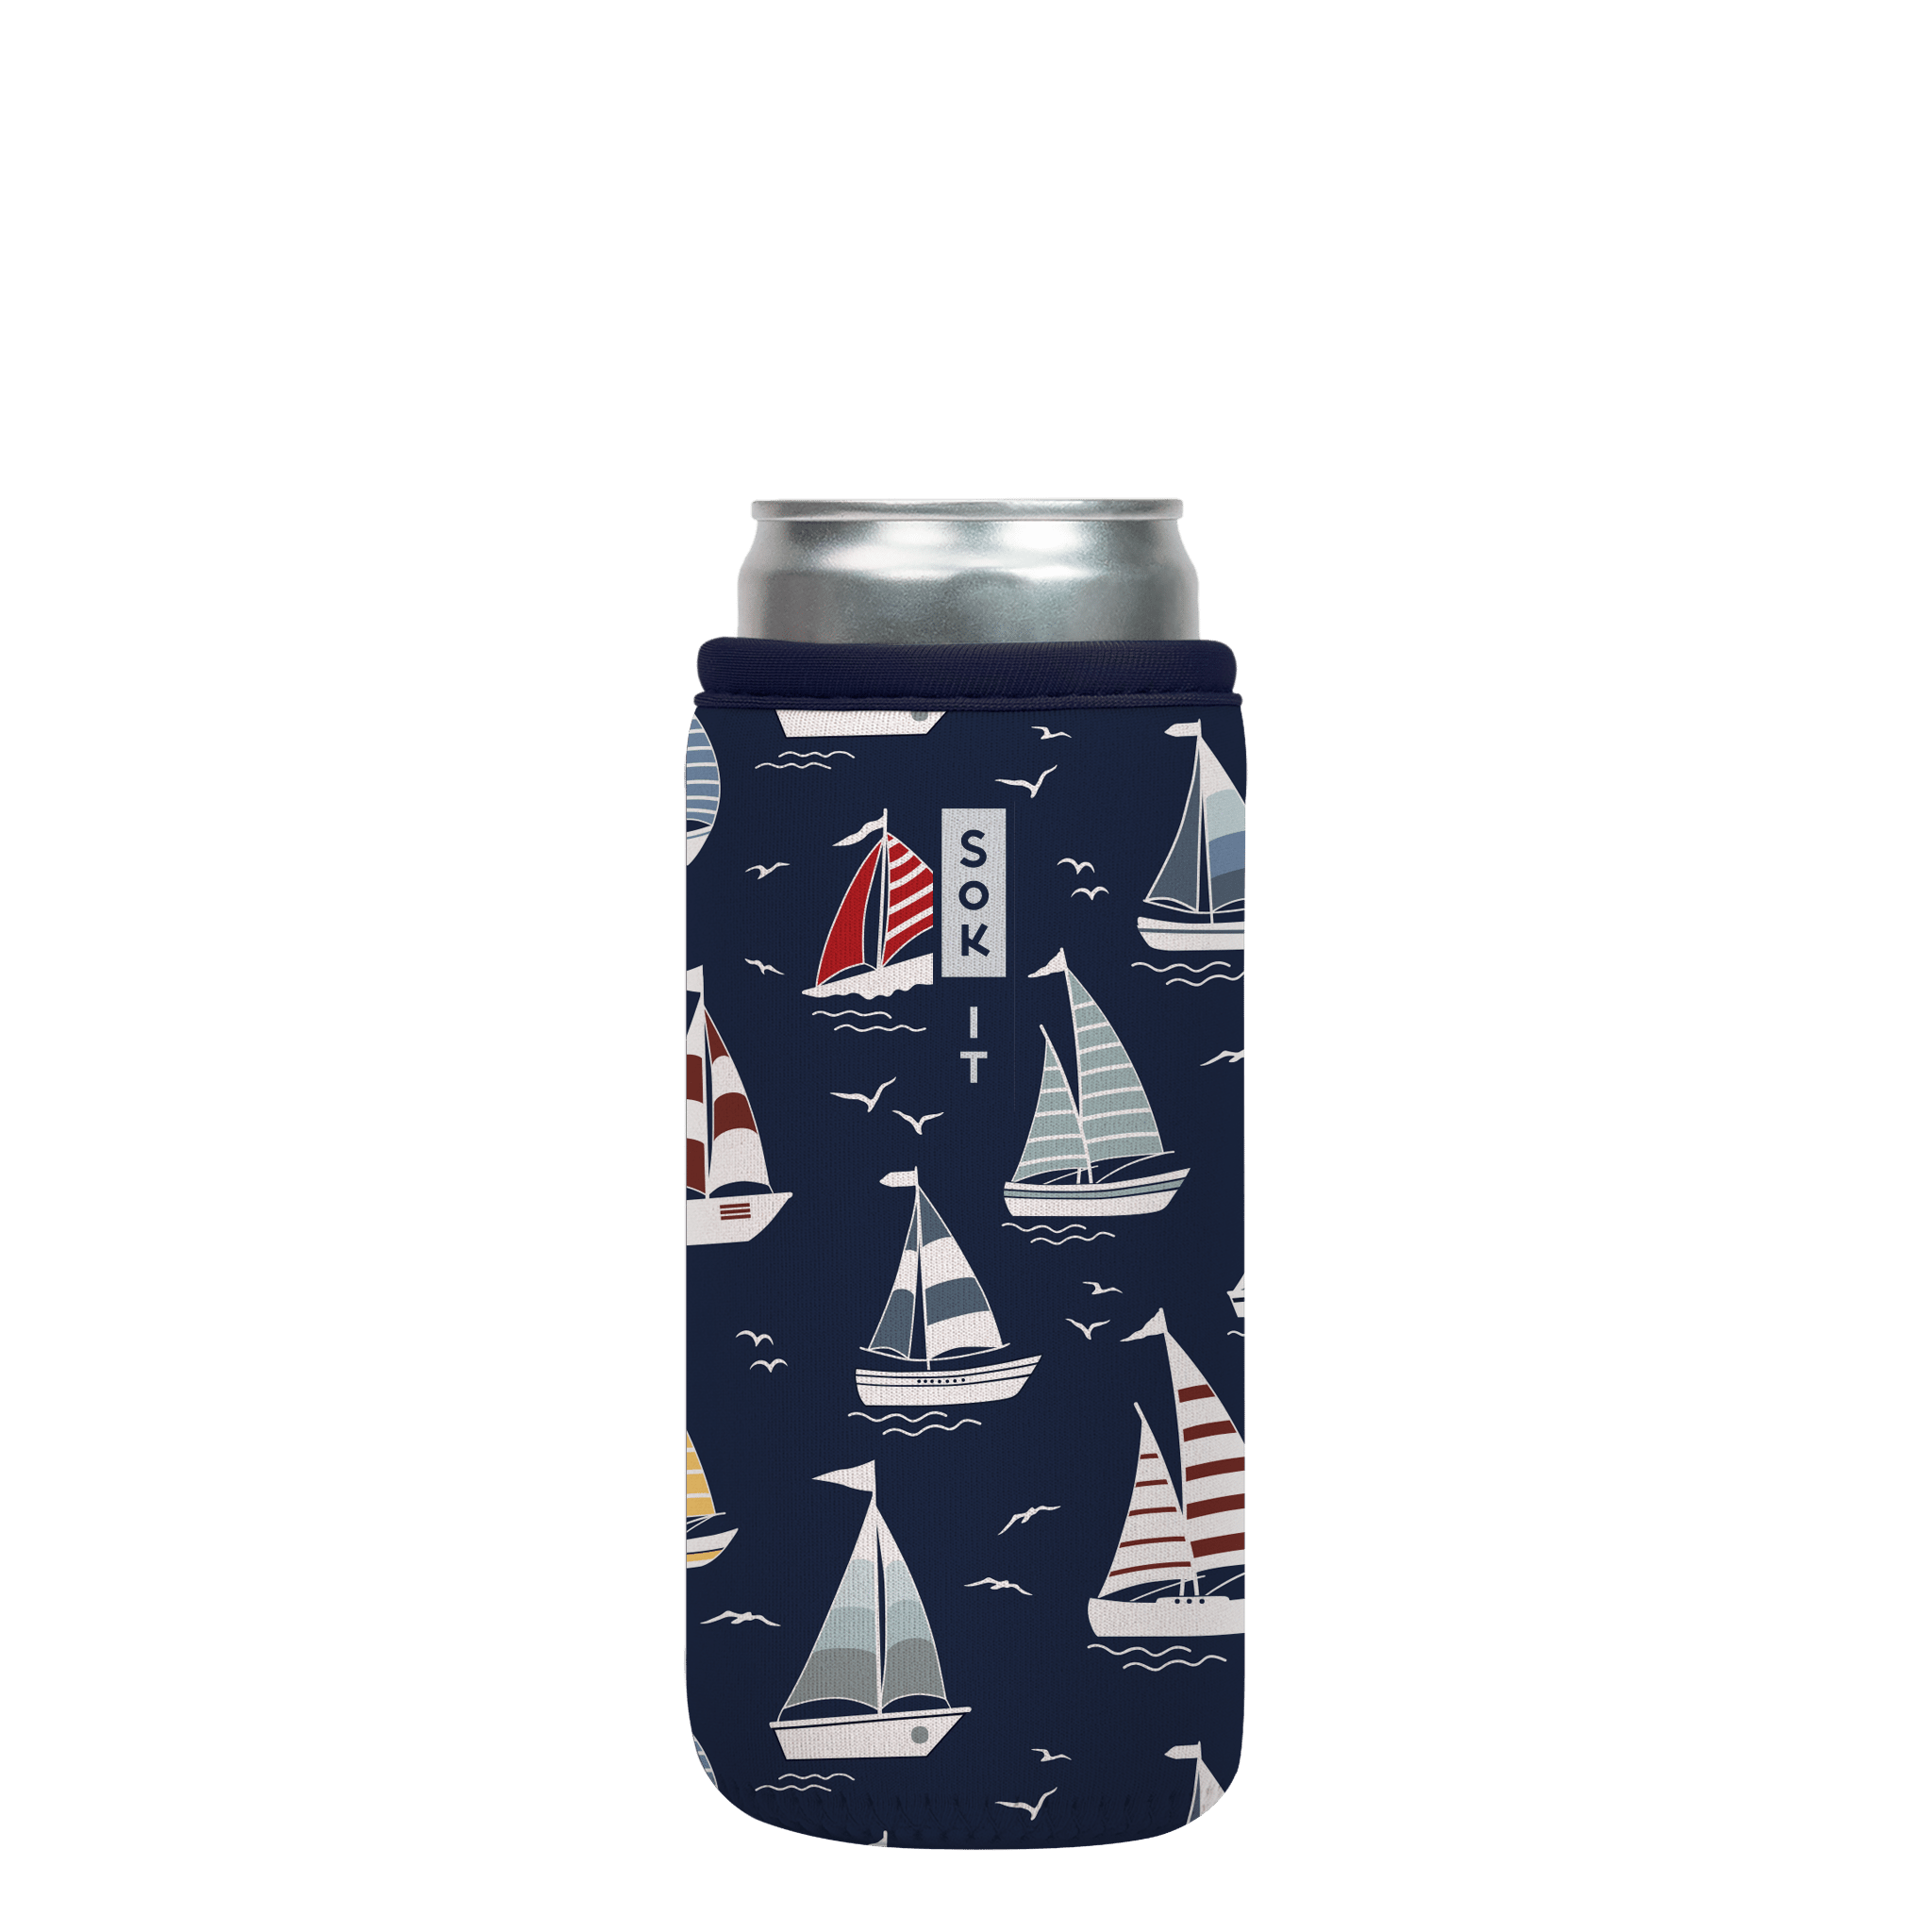 CanSok-Summer Holiday 12oz Slim Can 